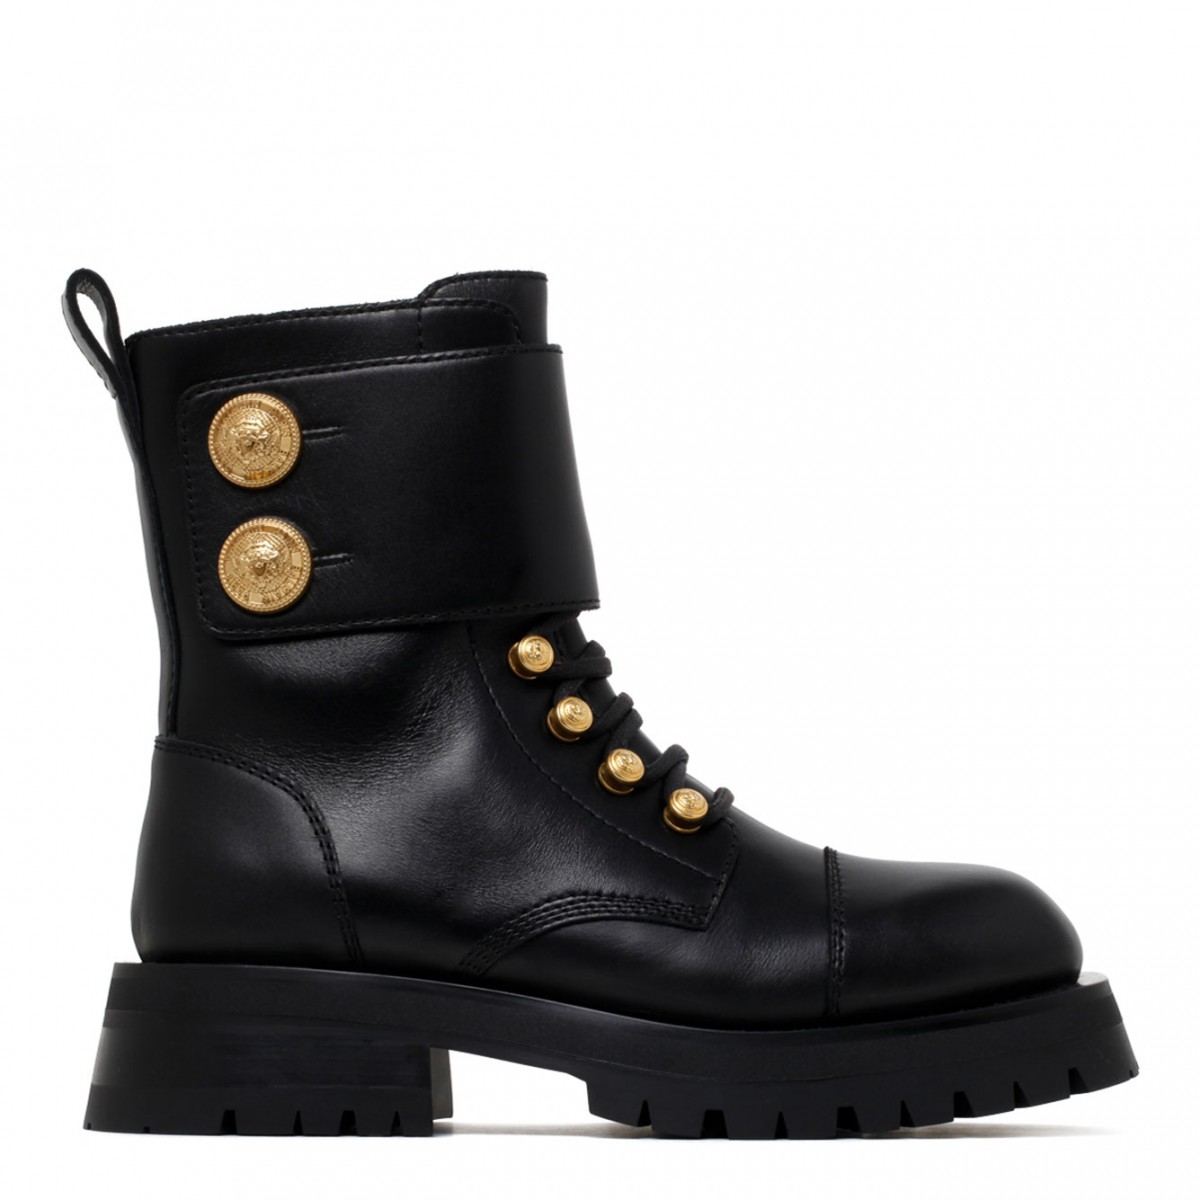 Black Calf Leather Ranger Army Ankle Boots